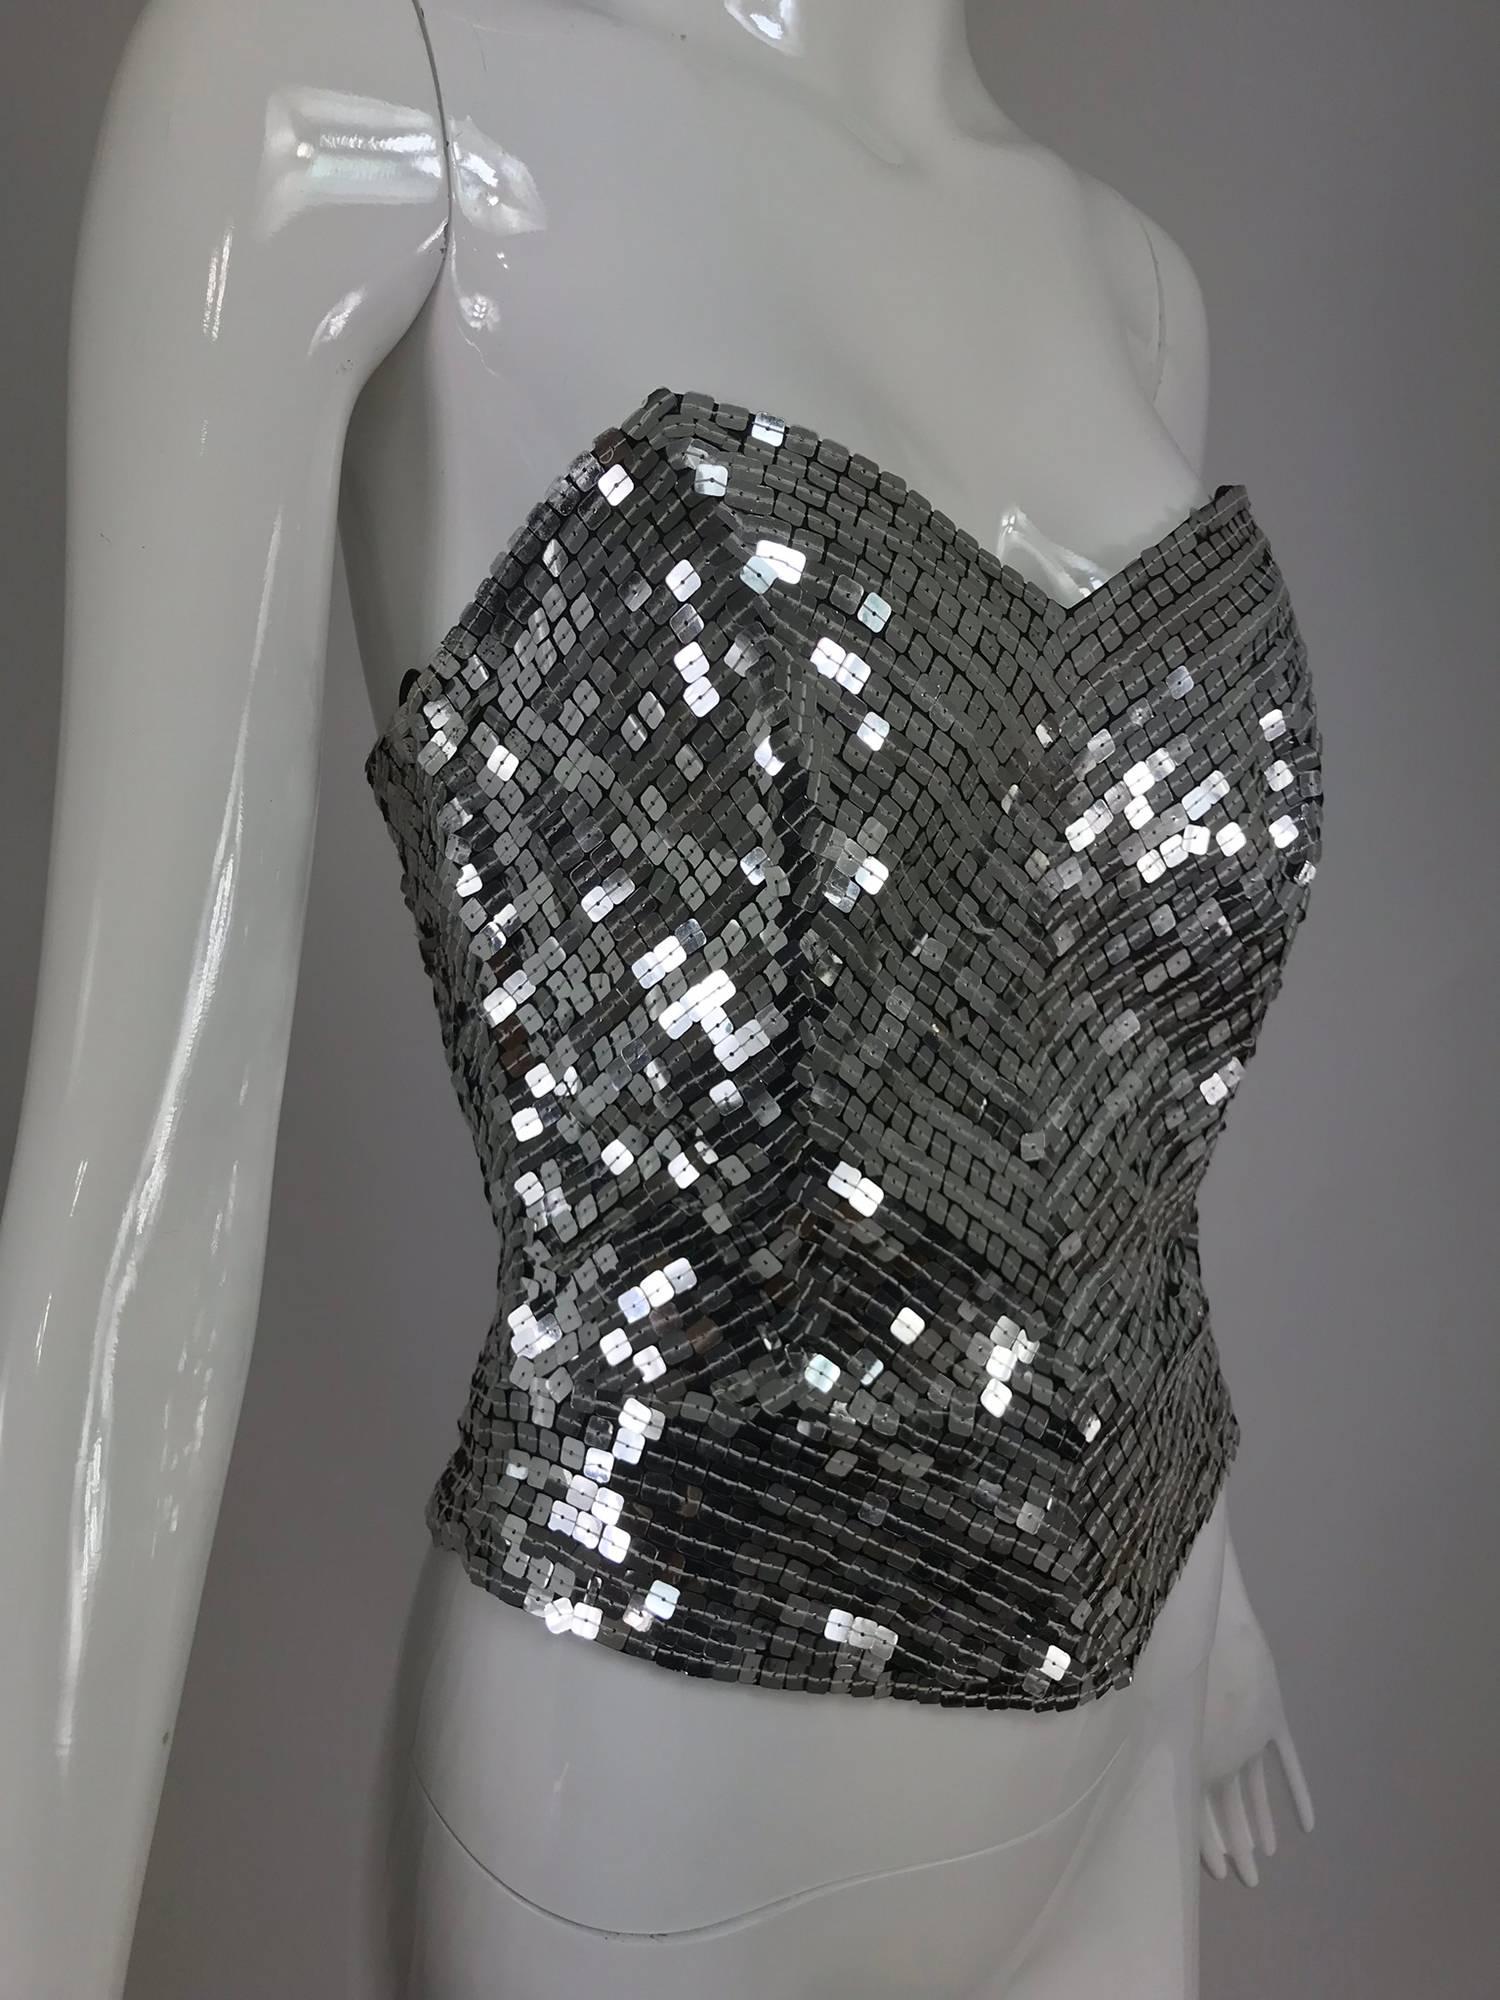 Oleg Cassini silver sequin bustier from the 1980s...Boned bustier with square silver sequins, closes at the back with a zipper...Peplum hem...Unlined...Fits a size 4-6
.
In excellent wearable condition... All our clothing is dry cleaned and